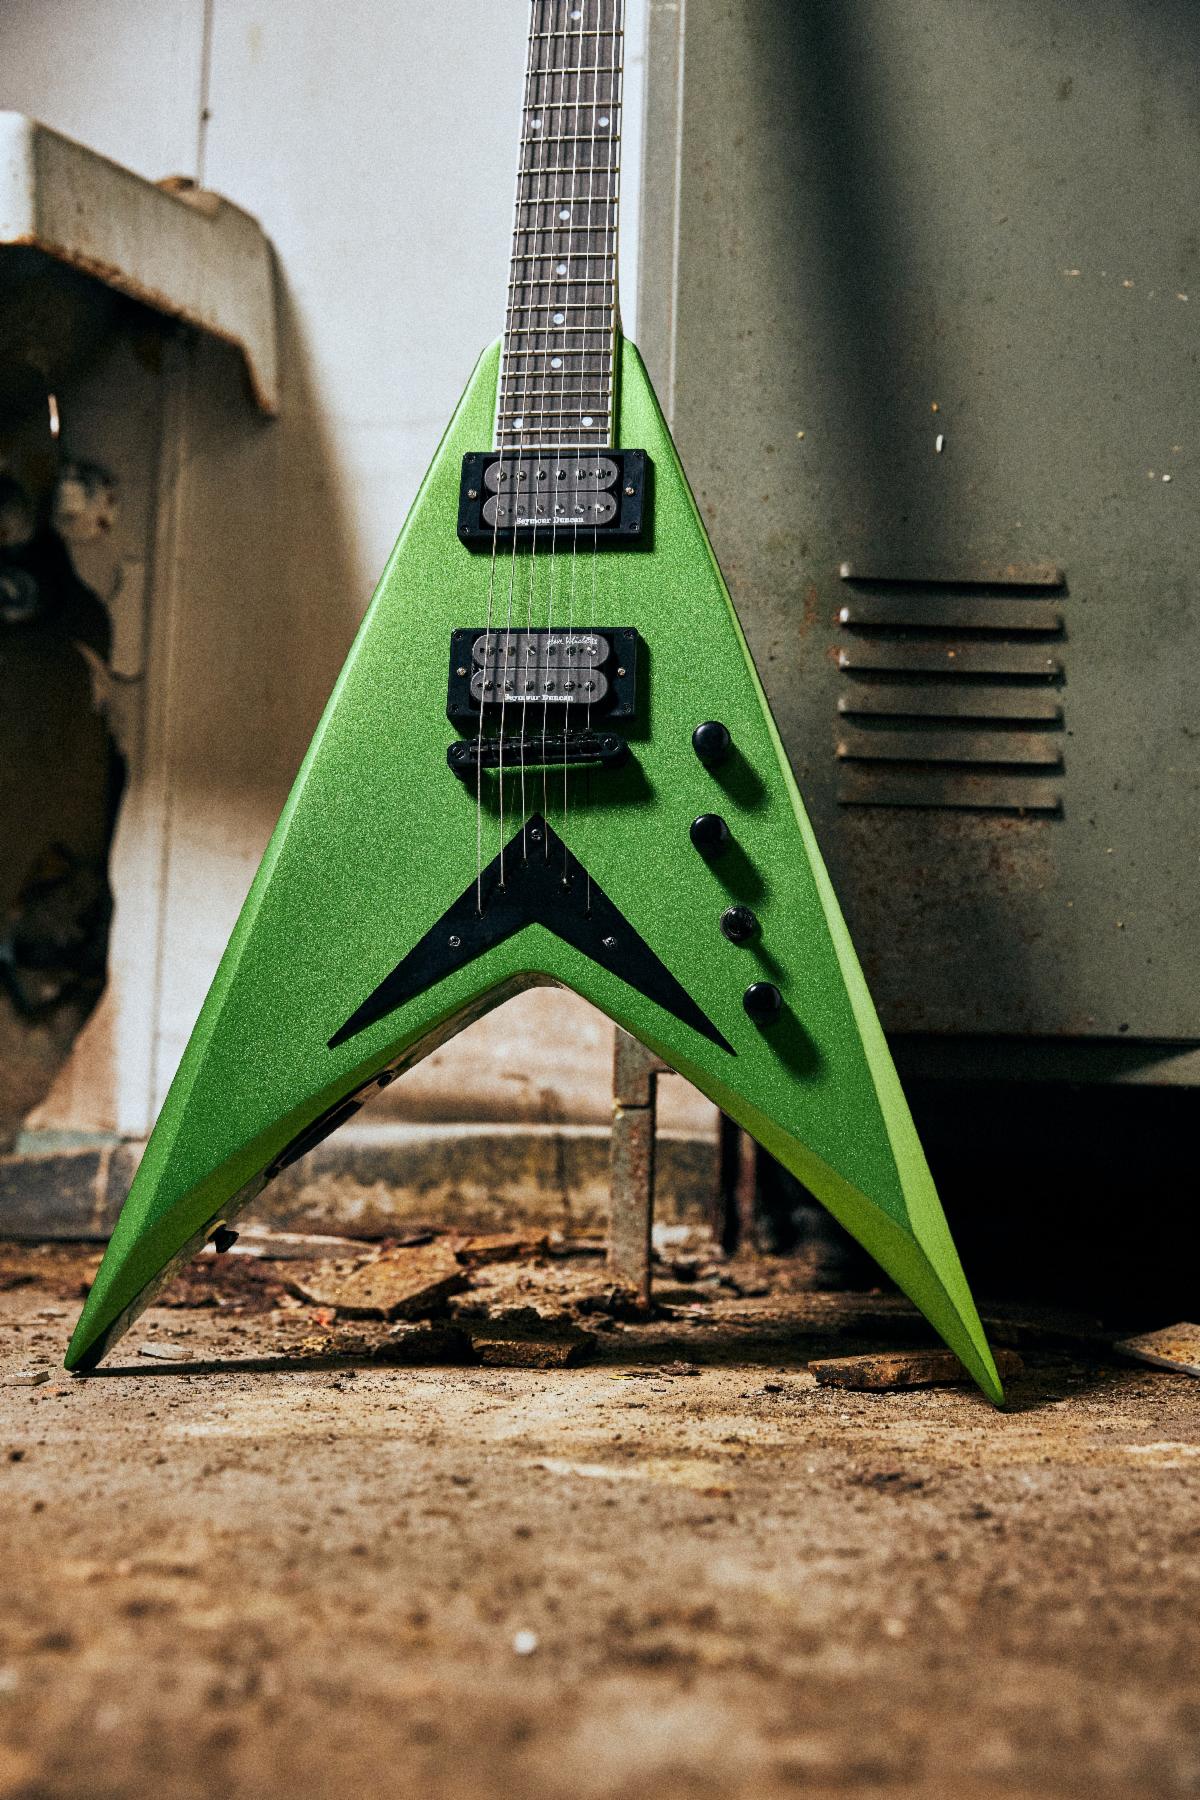 Dave Mustaine: Legendary Guitarist, Vocalist, and Songwriter, Launches Kramer Vanguard, Available Worldwide Today